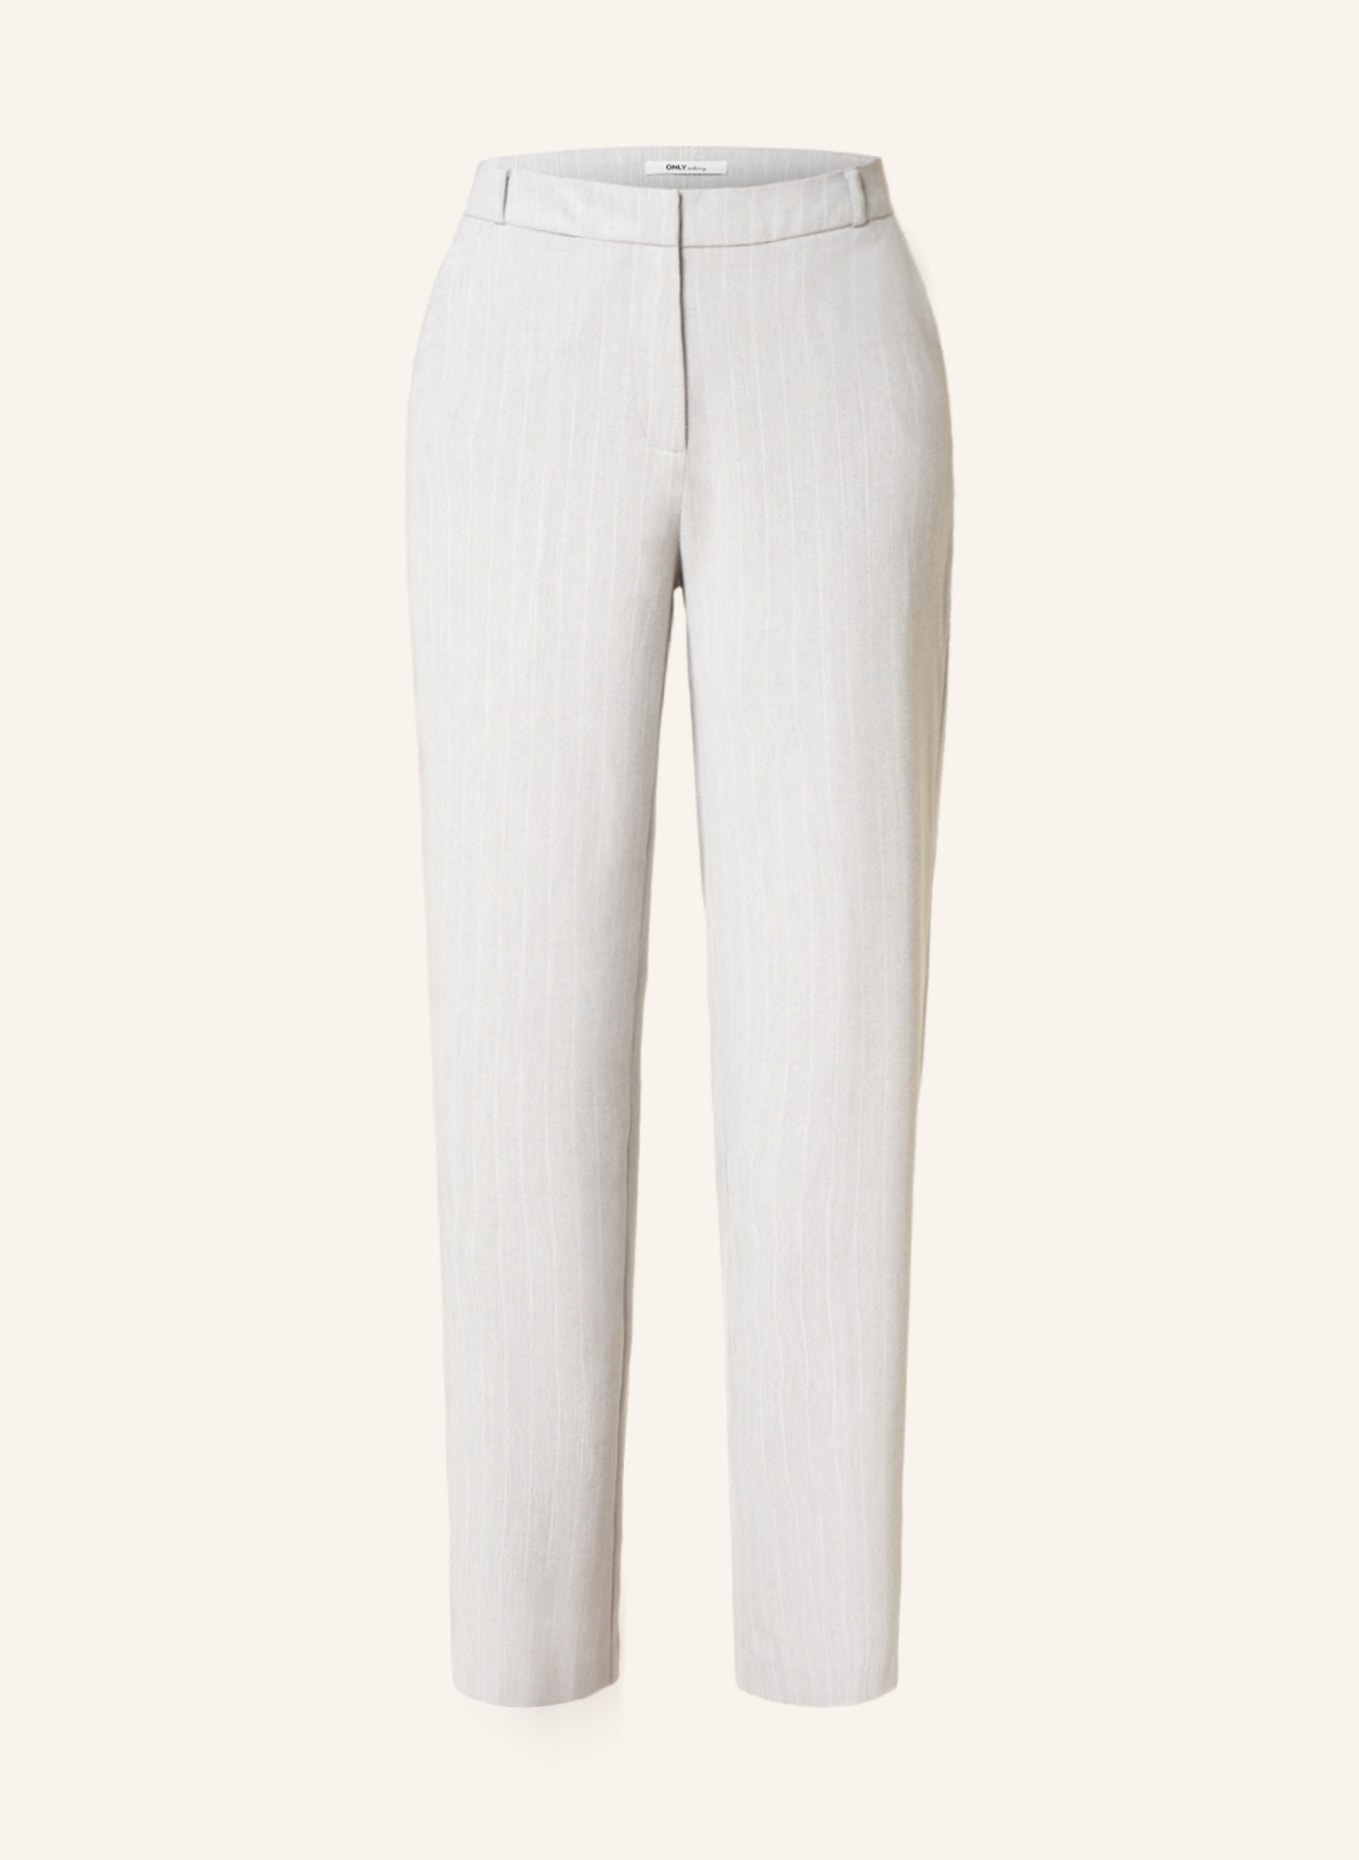 ONLY Pants, Color: LIGHT GRAY/ WHITE (Image 1)